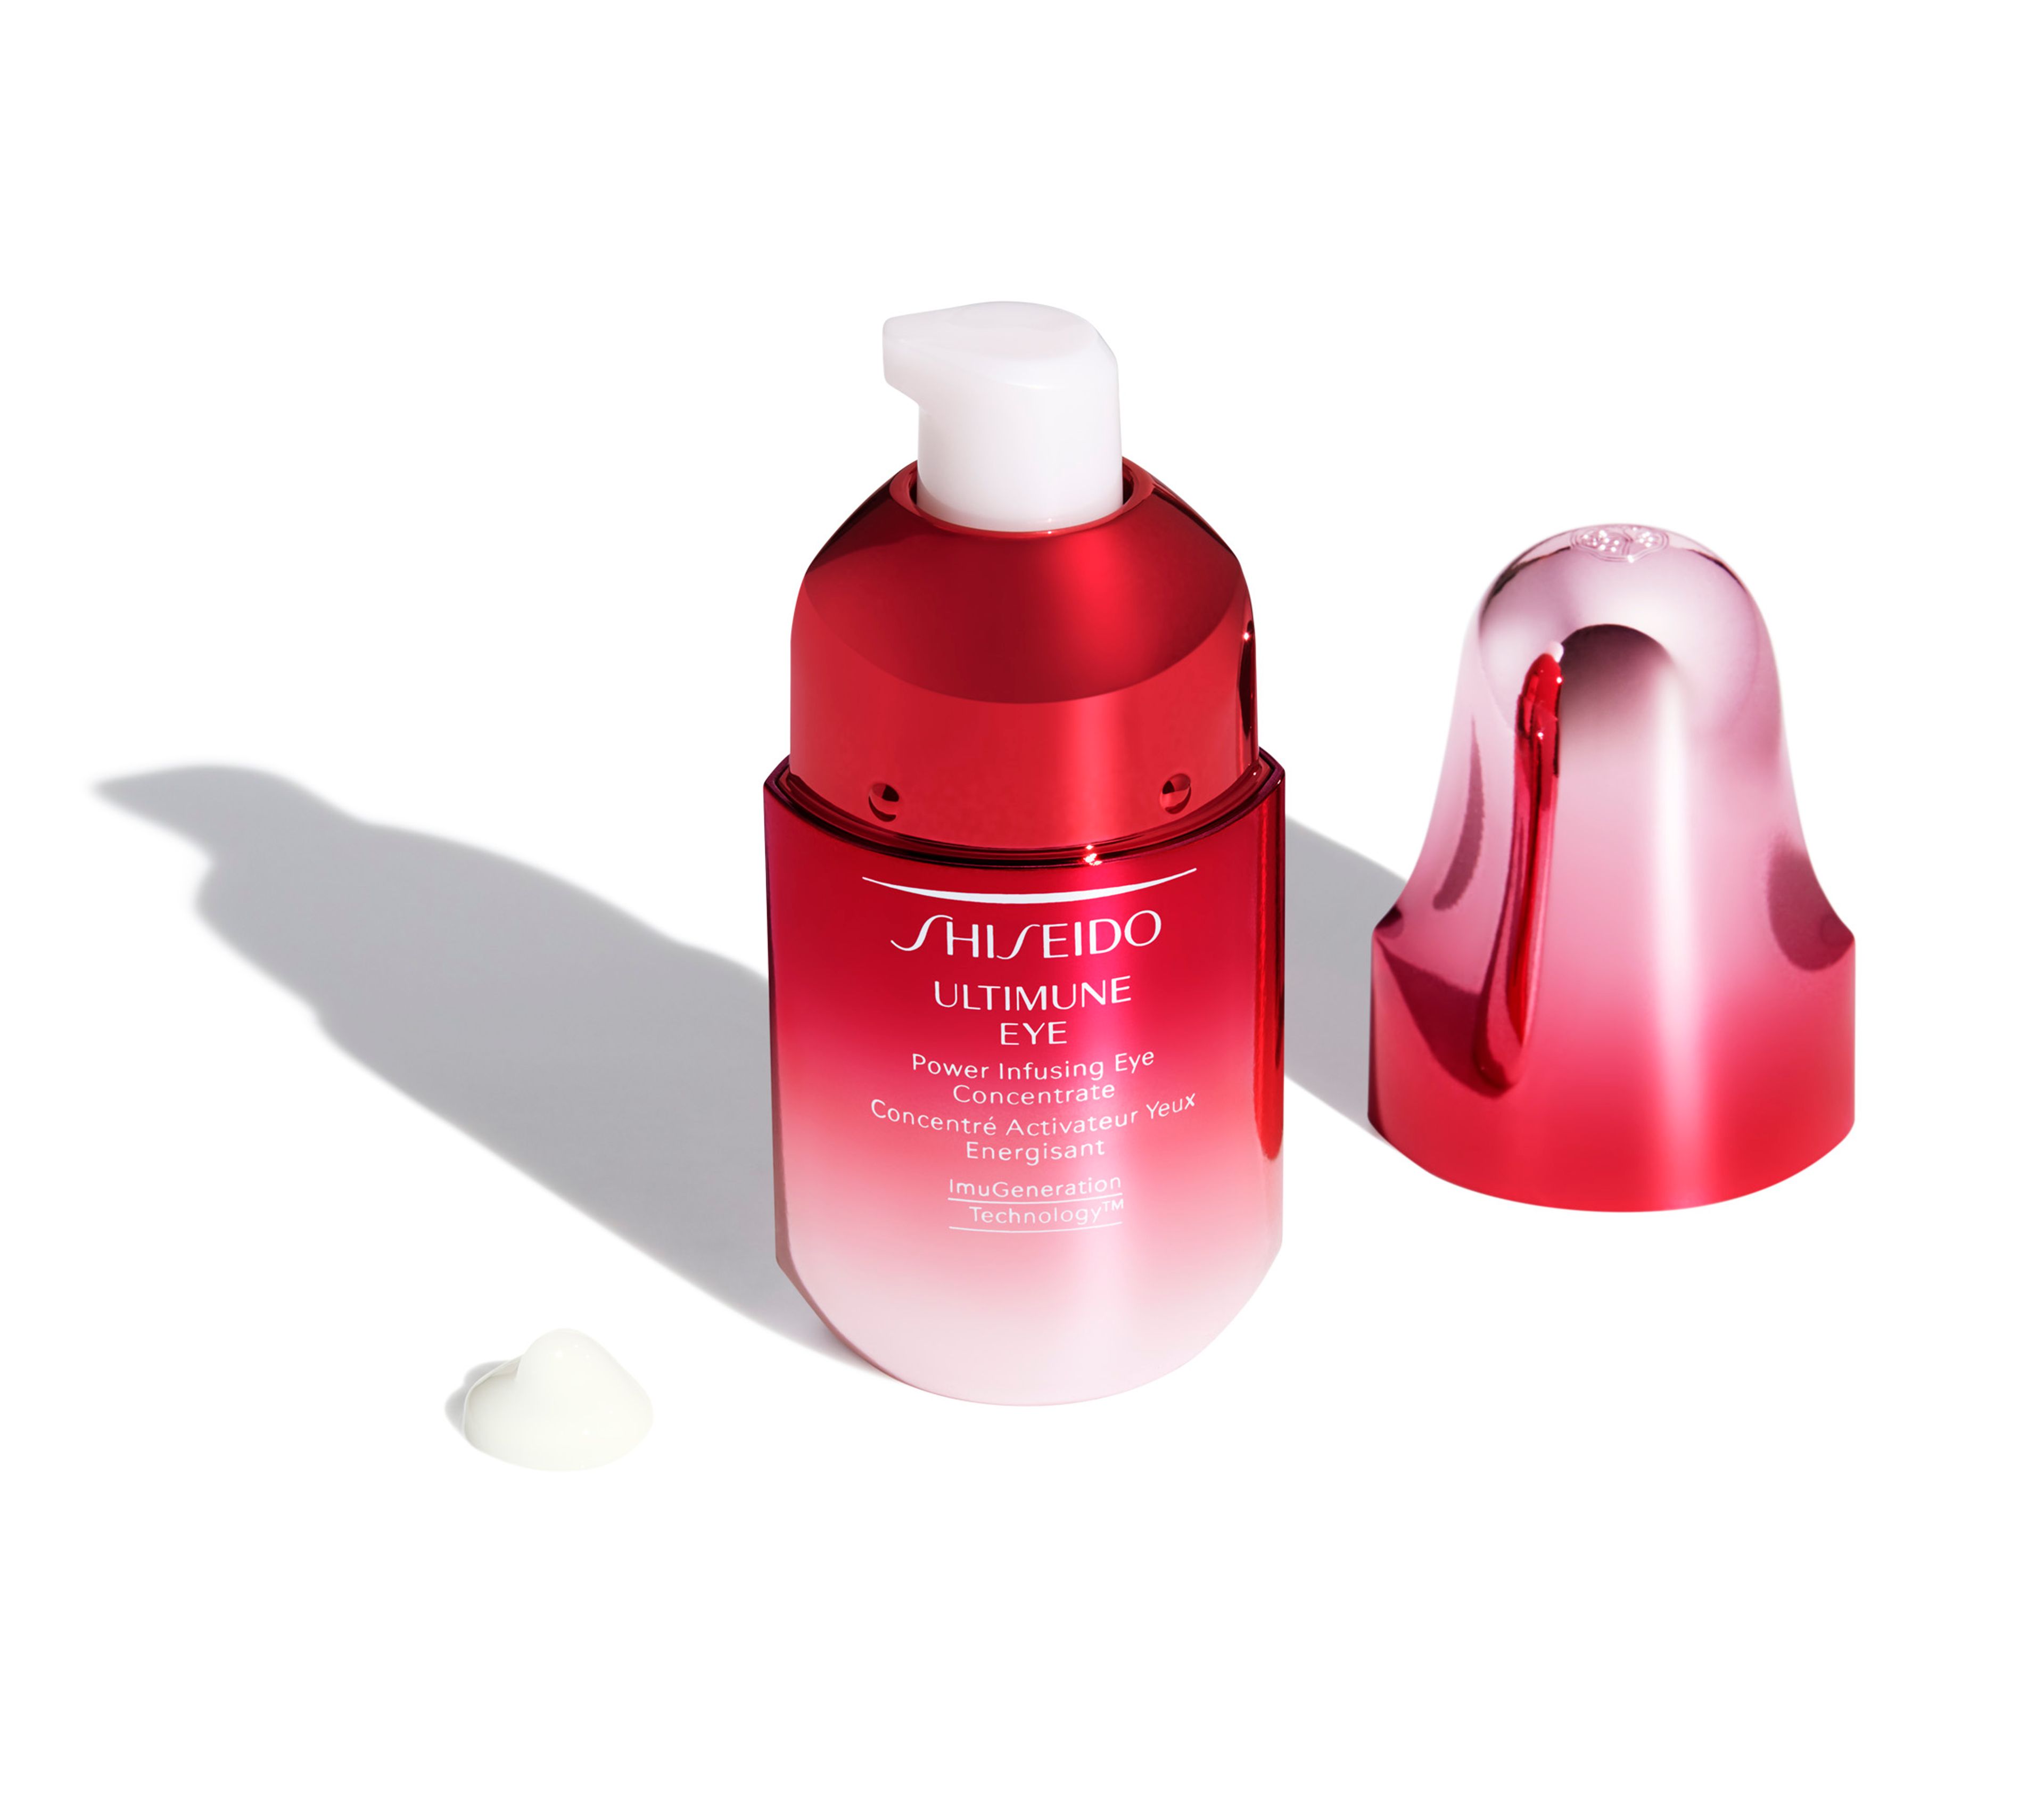 Ultimune Eye Power Infusing Concentrate Shiseido 2